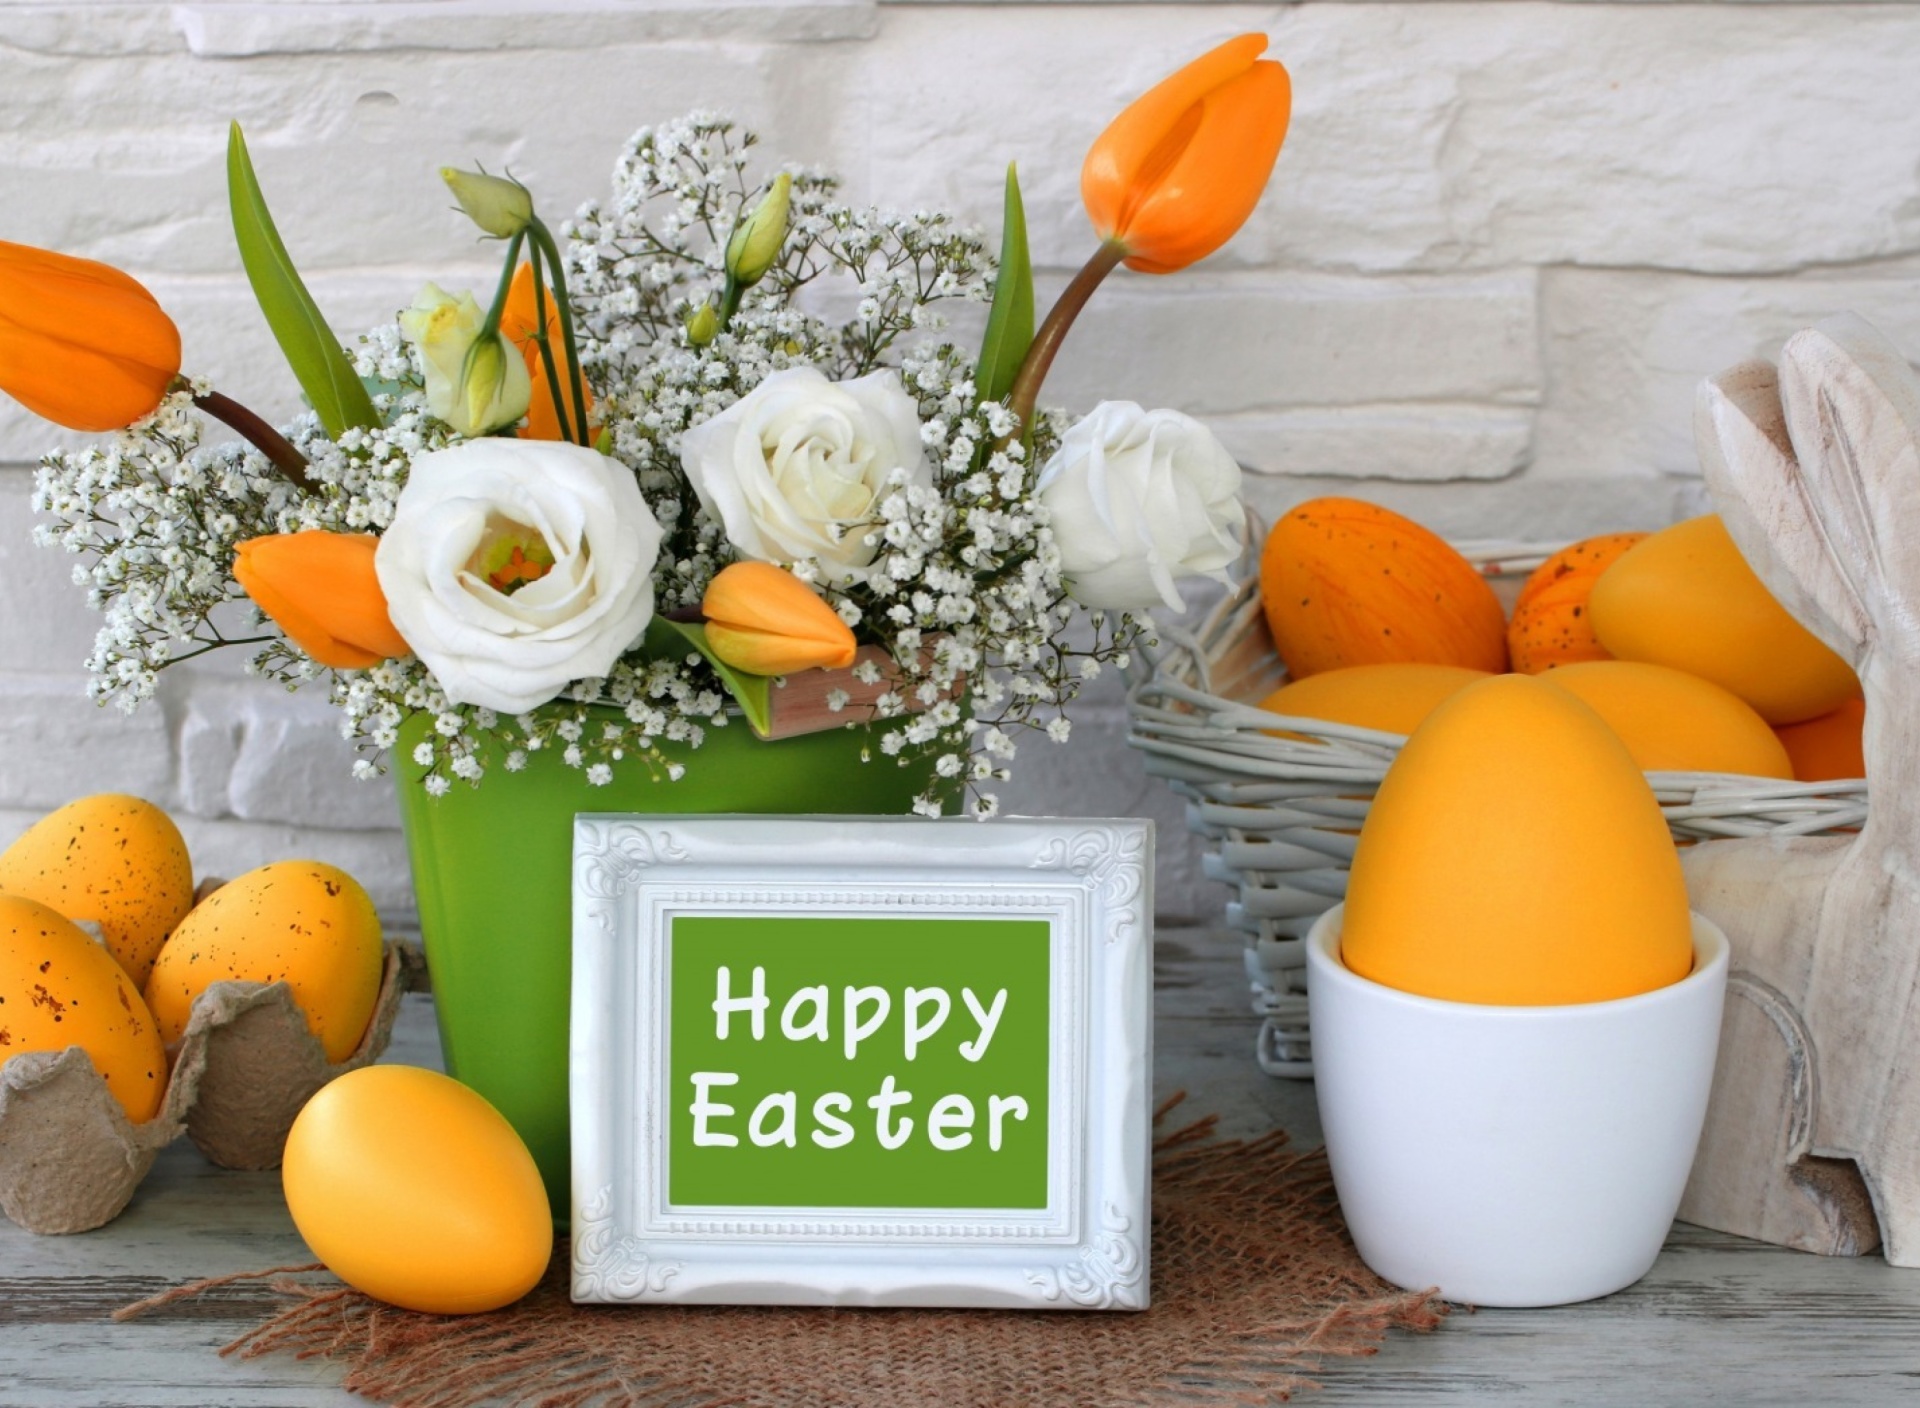 Easter decoration with yellow eggs and bunny screenshot #1 1920x1408